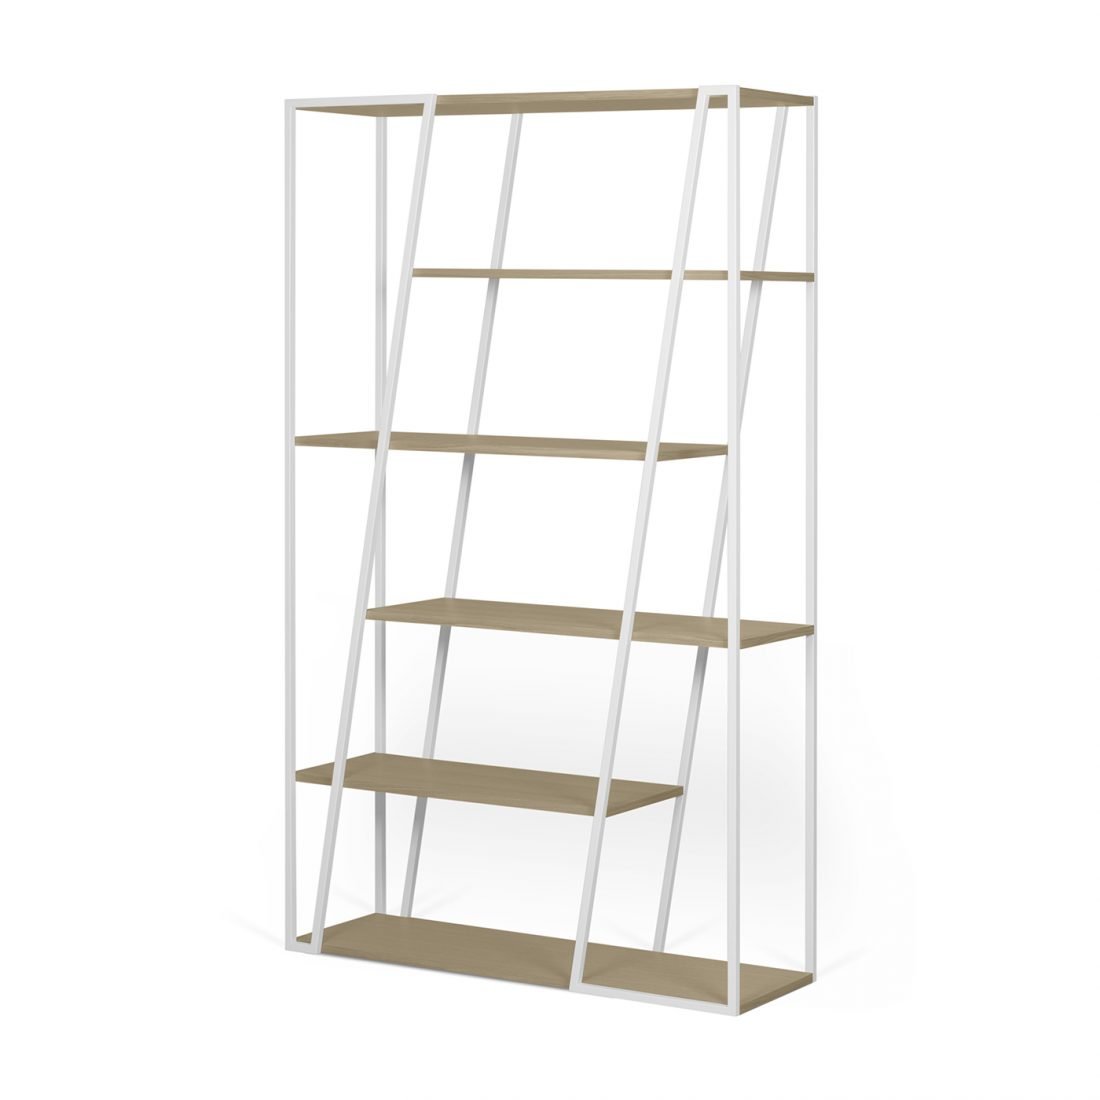 Albi Bookcase from TemaHome, designed by Tiago Sitima